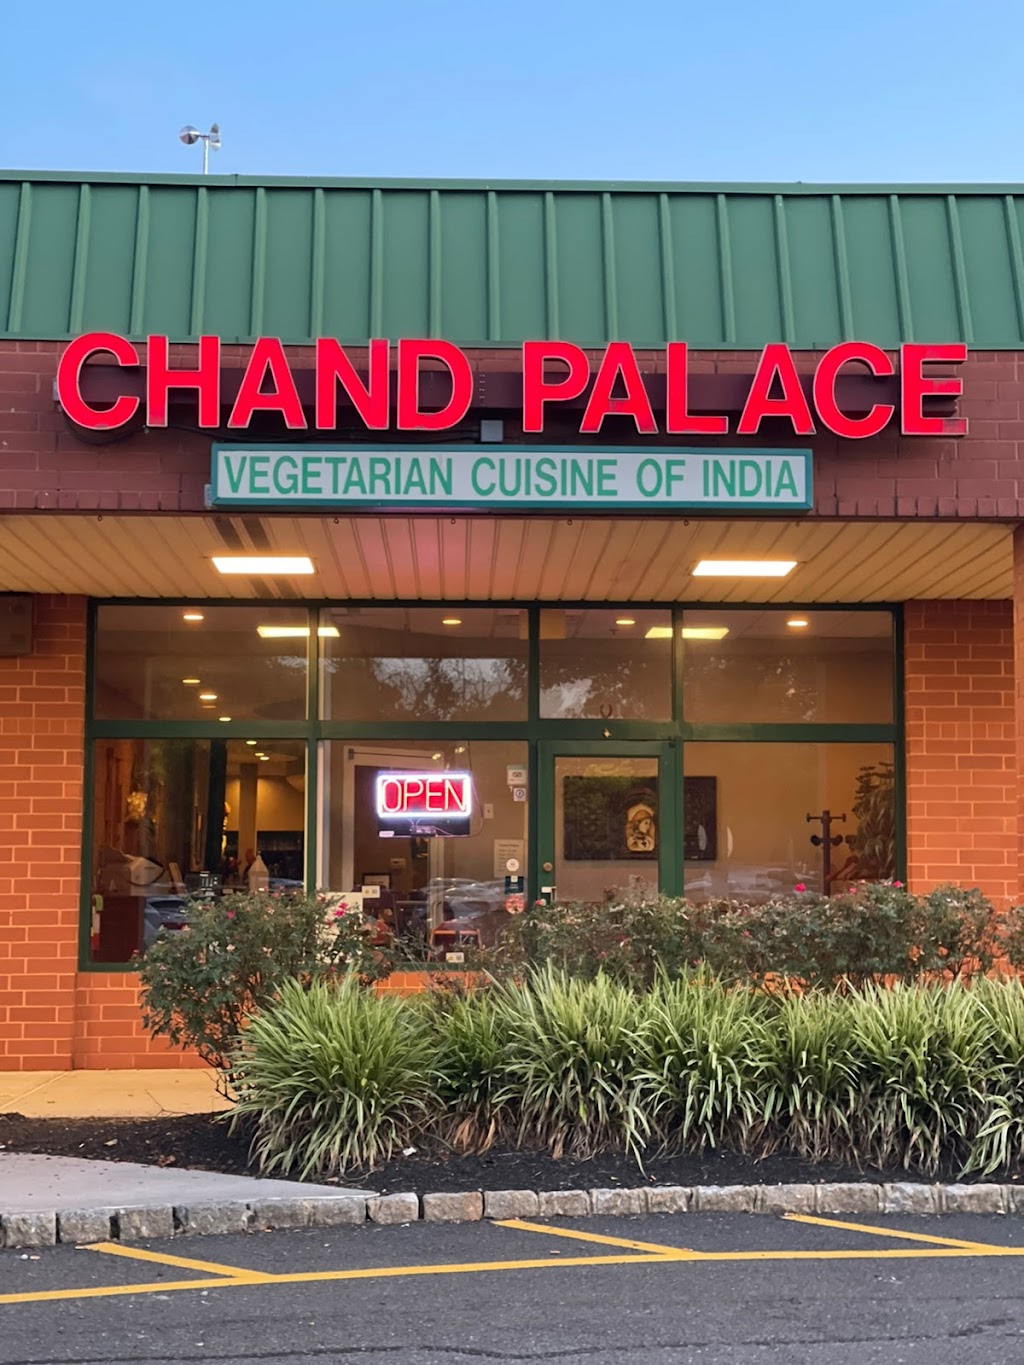 Chand Palace - Vegetarian Cuisine of India | 1296 Centennial Ave, Piscataway, NJ 08854 | Phone: (732) 465-1474